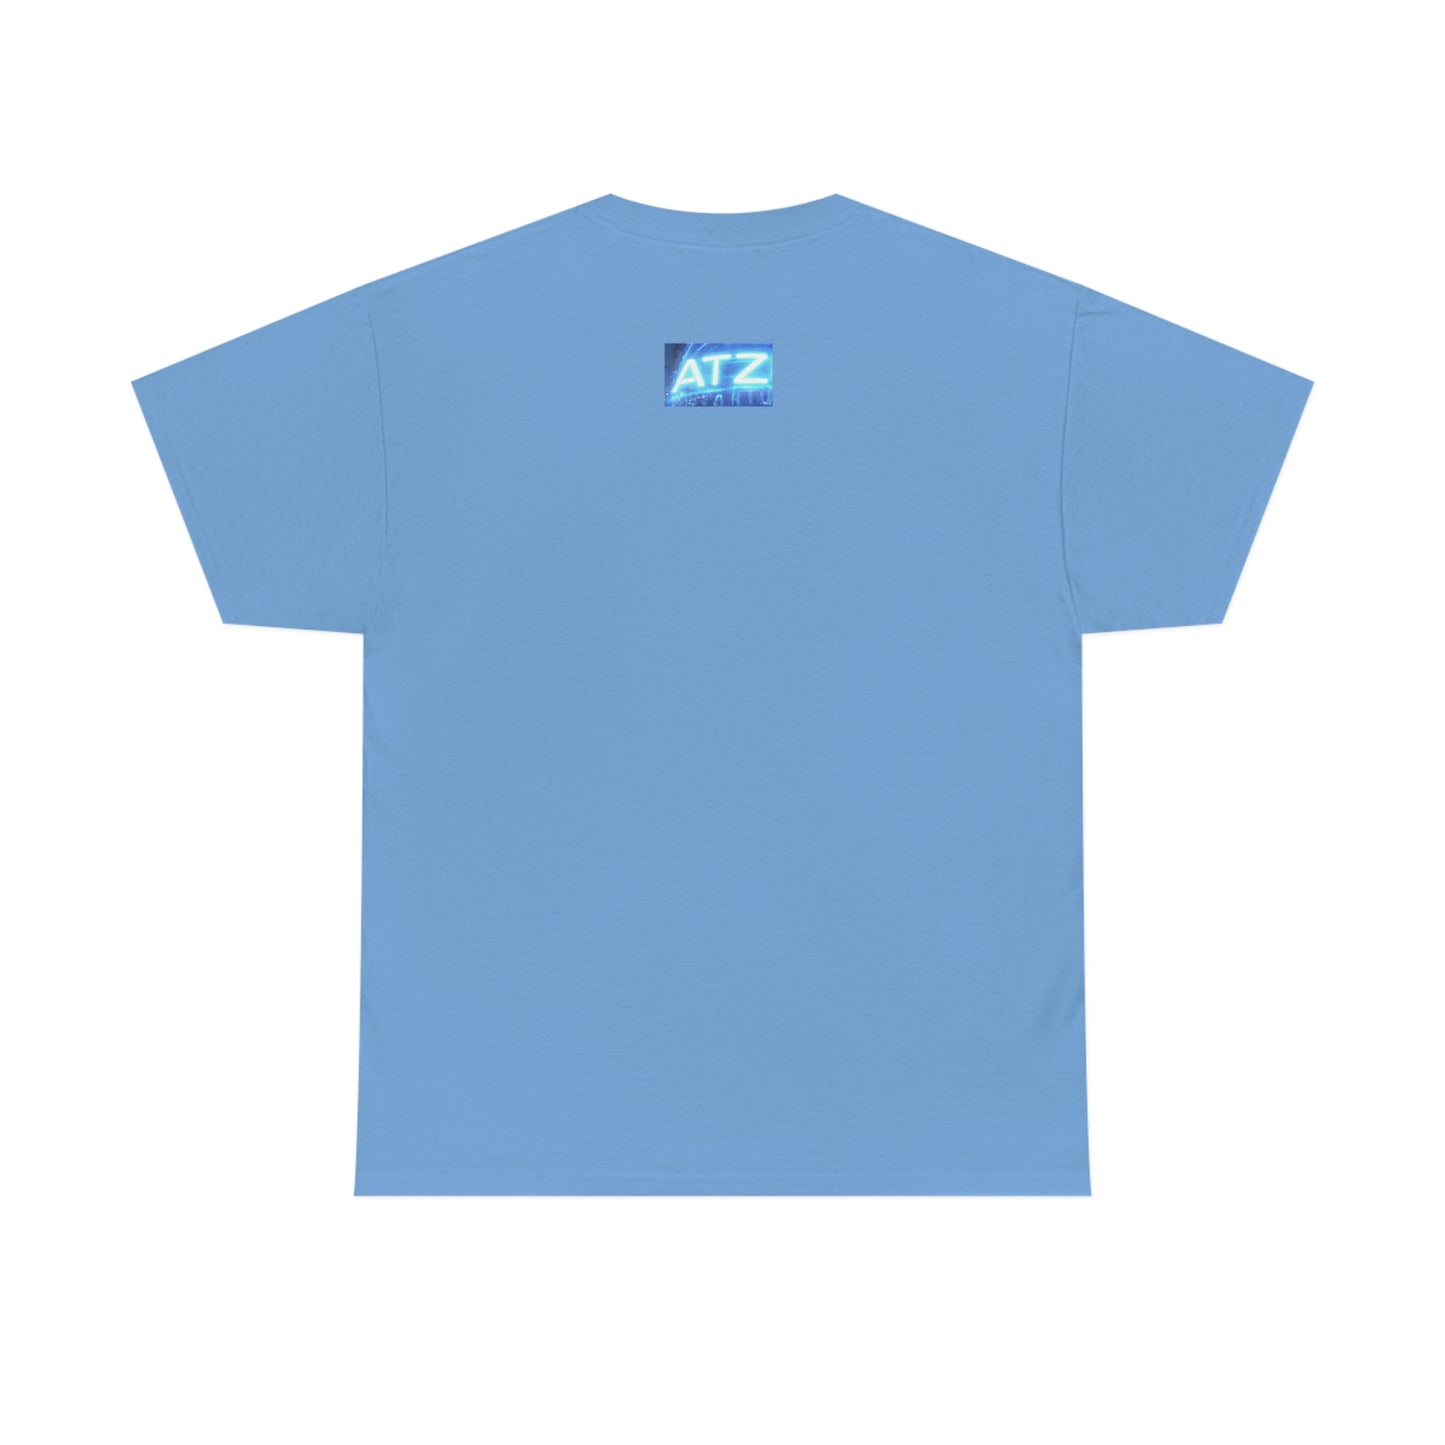 Atziluth Gallery "Burnout" T-Shirt